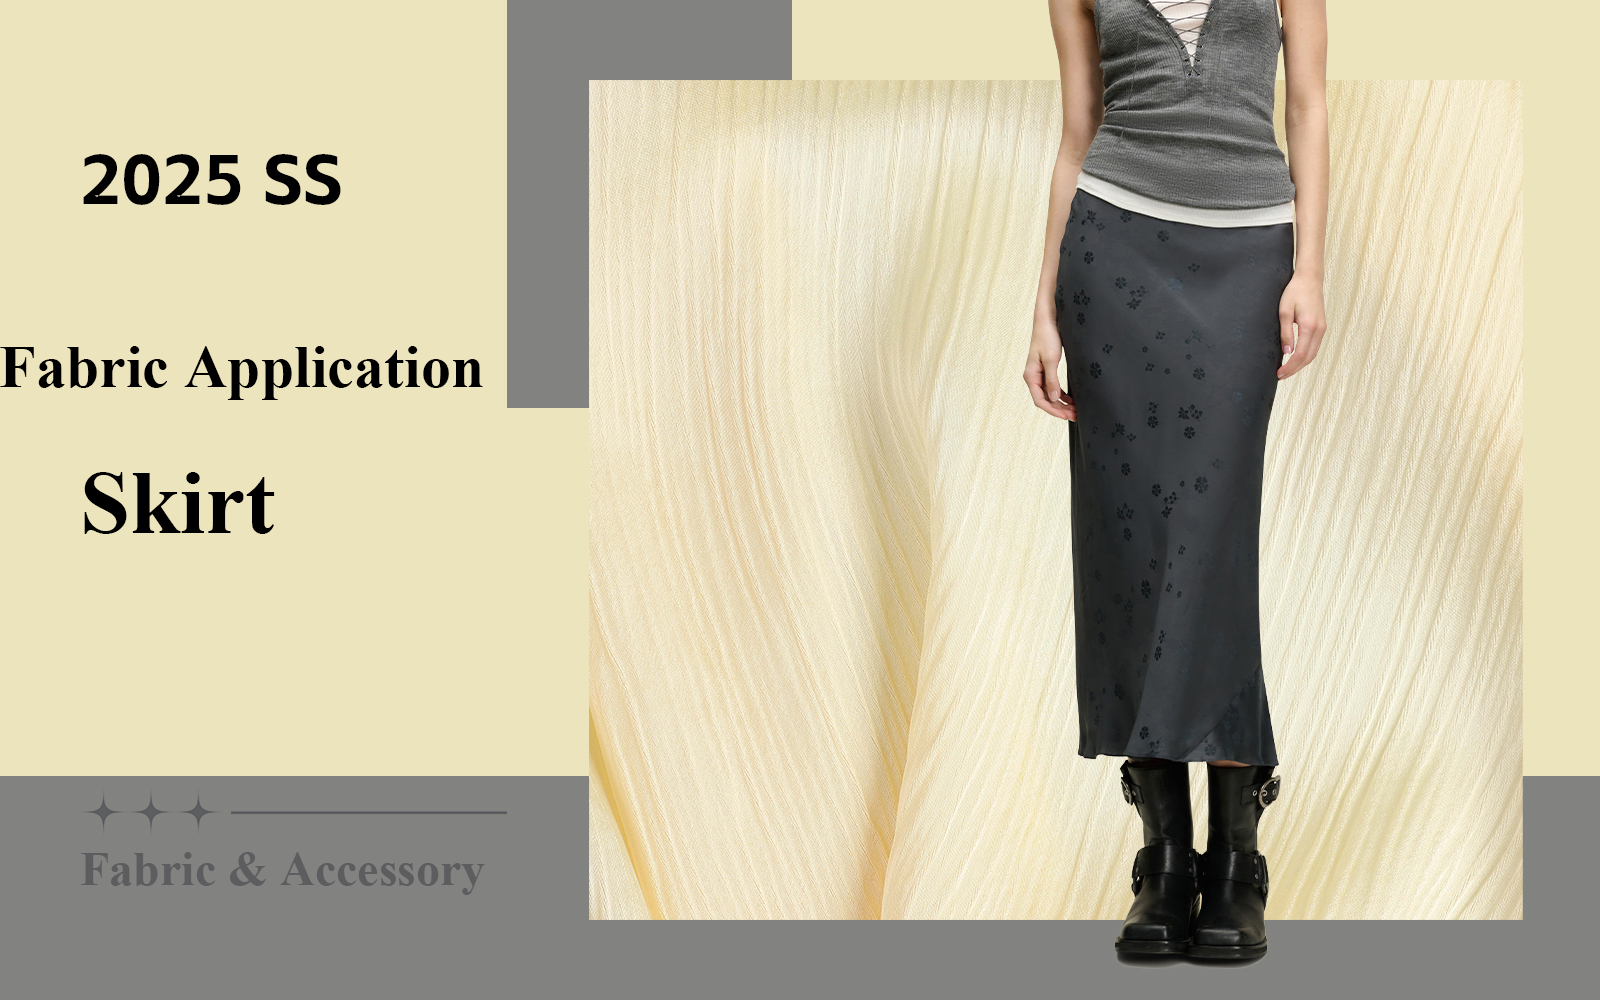 The Fabric Trend for Women's Skirt